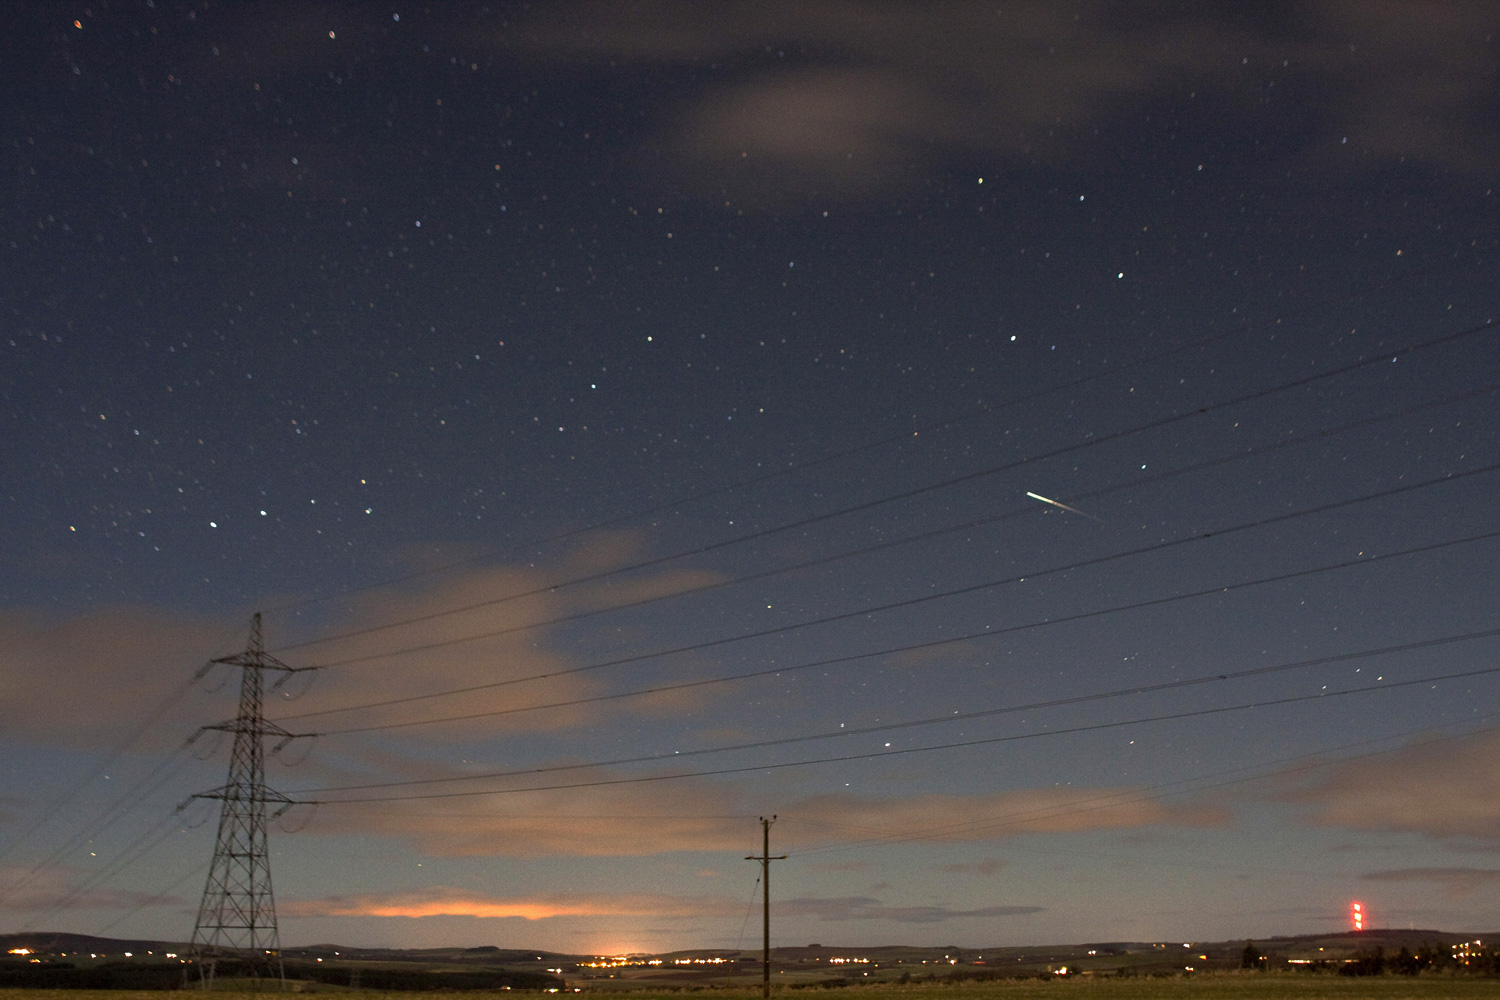 March 3, 2012. An amateur astronomer captures a meteor or meteorite near his home in Northern Scotland.